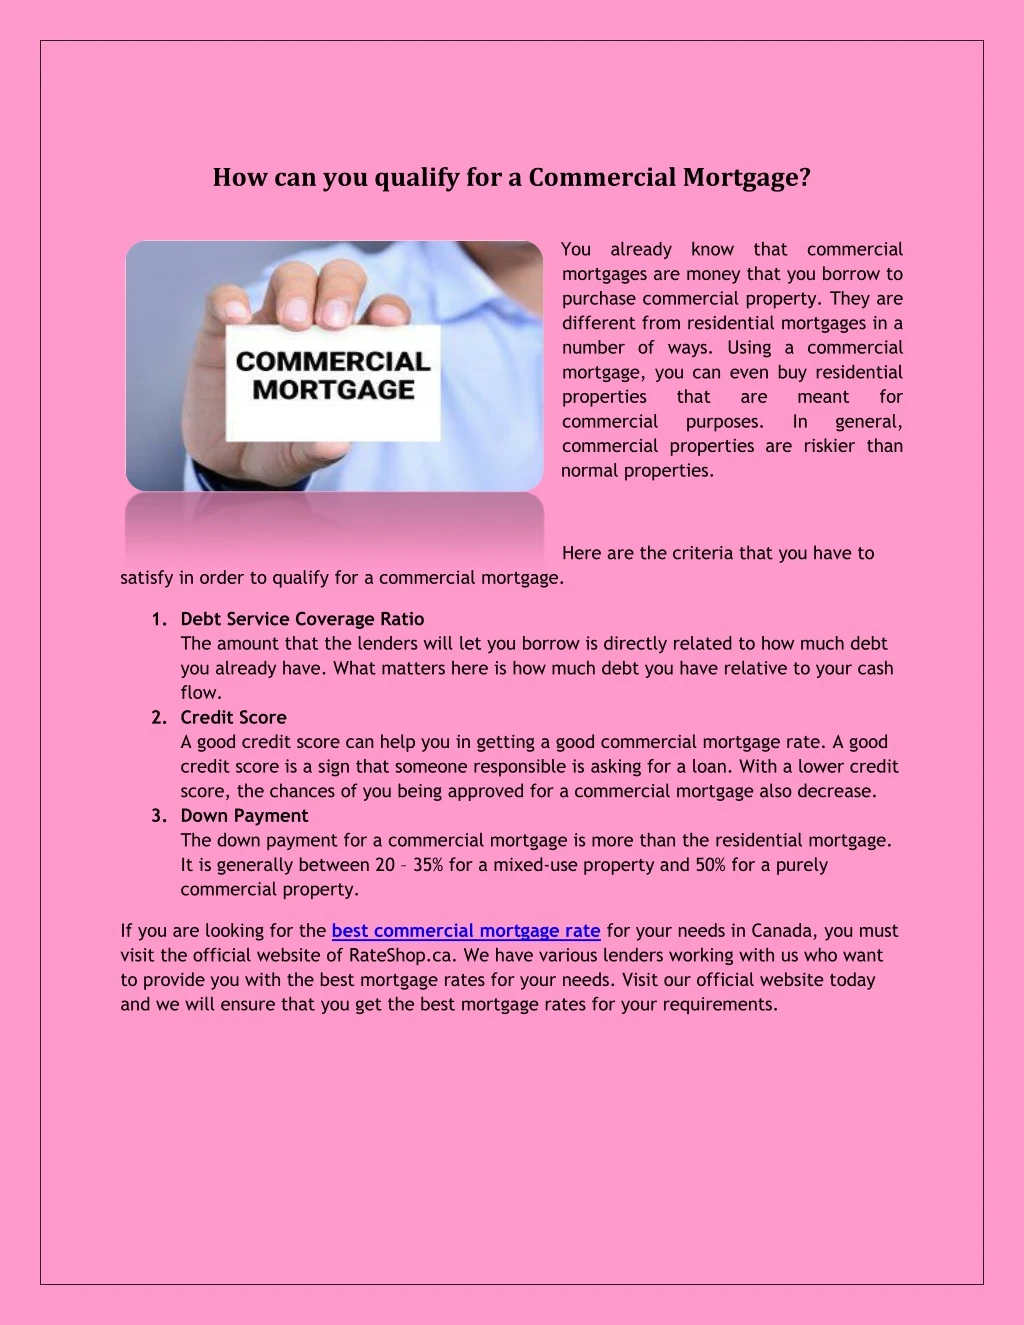 how can you qualify for a commercial mortgage